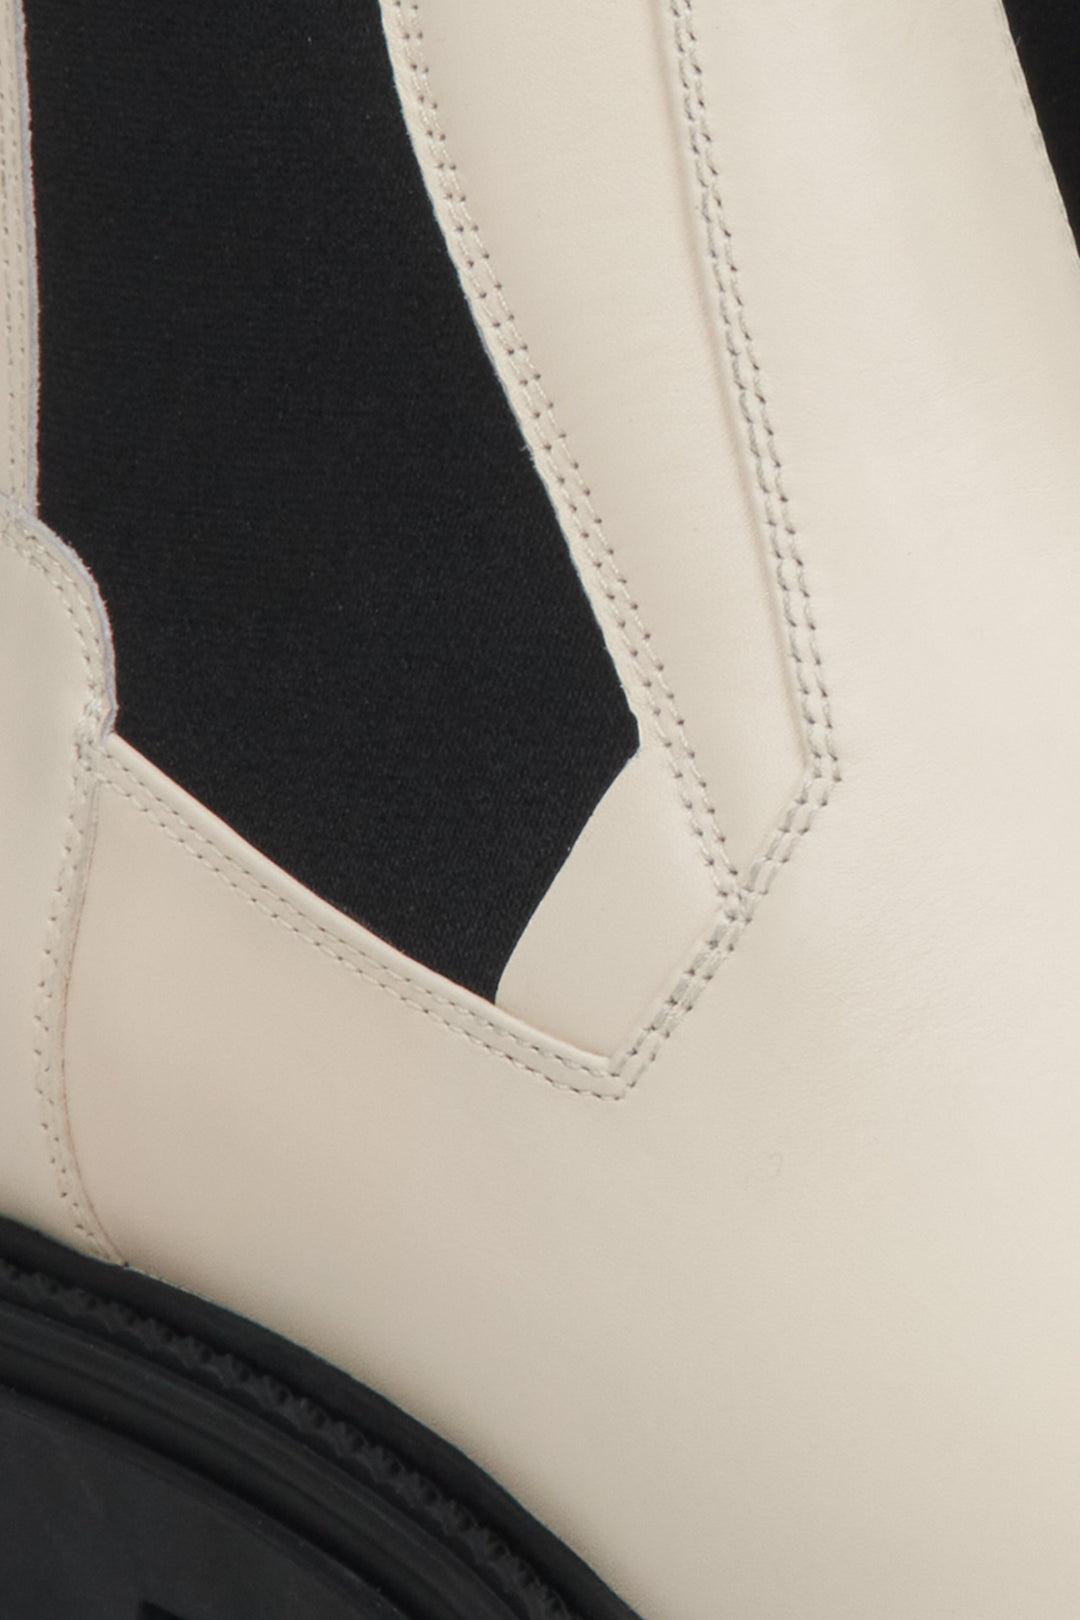 Women's beige and black leather Chelsea boots - a close-up on details.